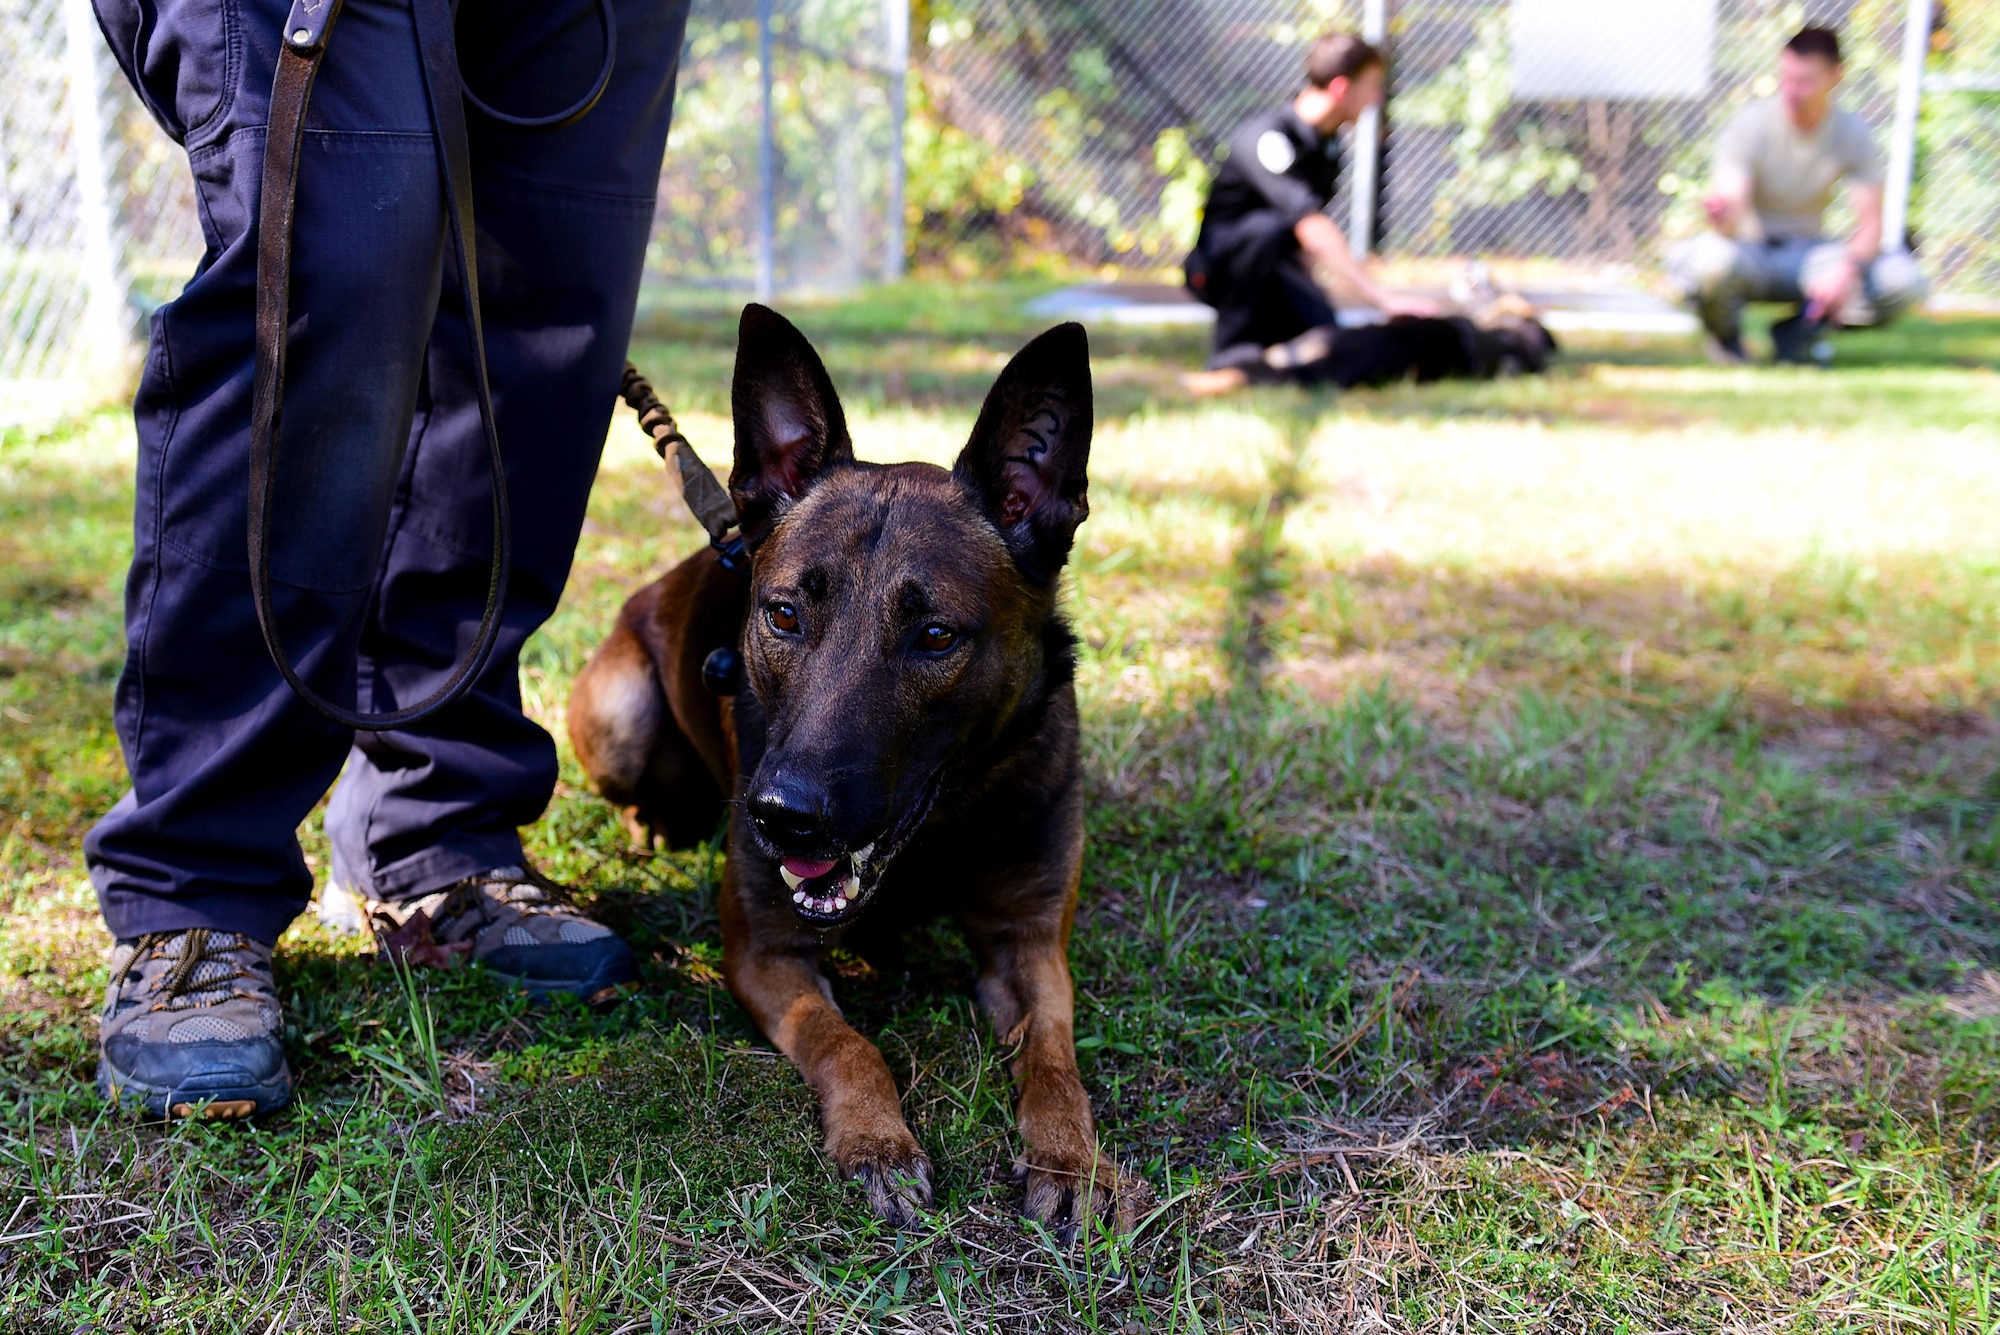 UUriah, 2nd Law Enforcement Battalion patrol explosive detection dog, relaxes before competing in the “Hardest Hit” contest during the East Coast Iron Dog competition, Oct. 25, 2017, at Seymour Johnson Air Force Base, North Carolina. The competition consisted of a narcotics and explosive detection contest, high-risk patrol scenario with tactical movements, hardest-hitting dog contest, and 2-mile endurance run. (U.S. Air Force photo by Airman 1st Class Kenneth Boyton)